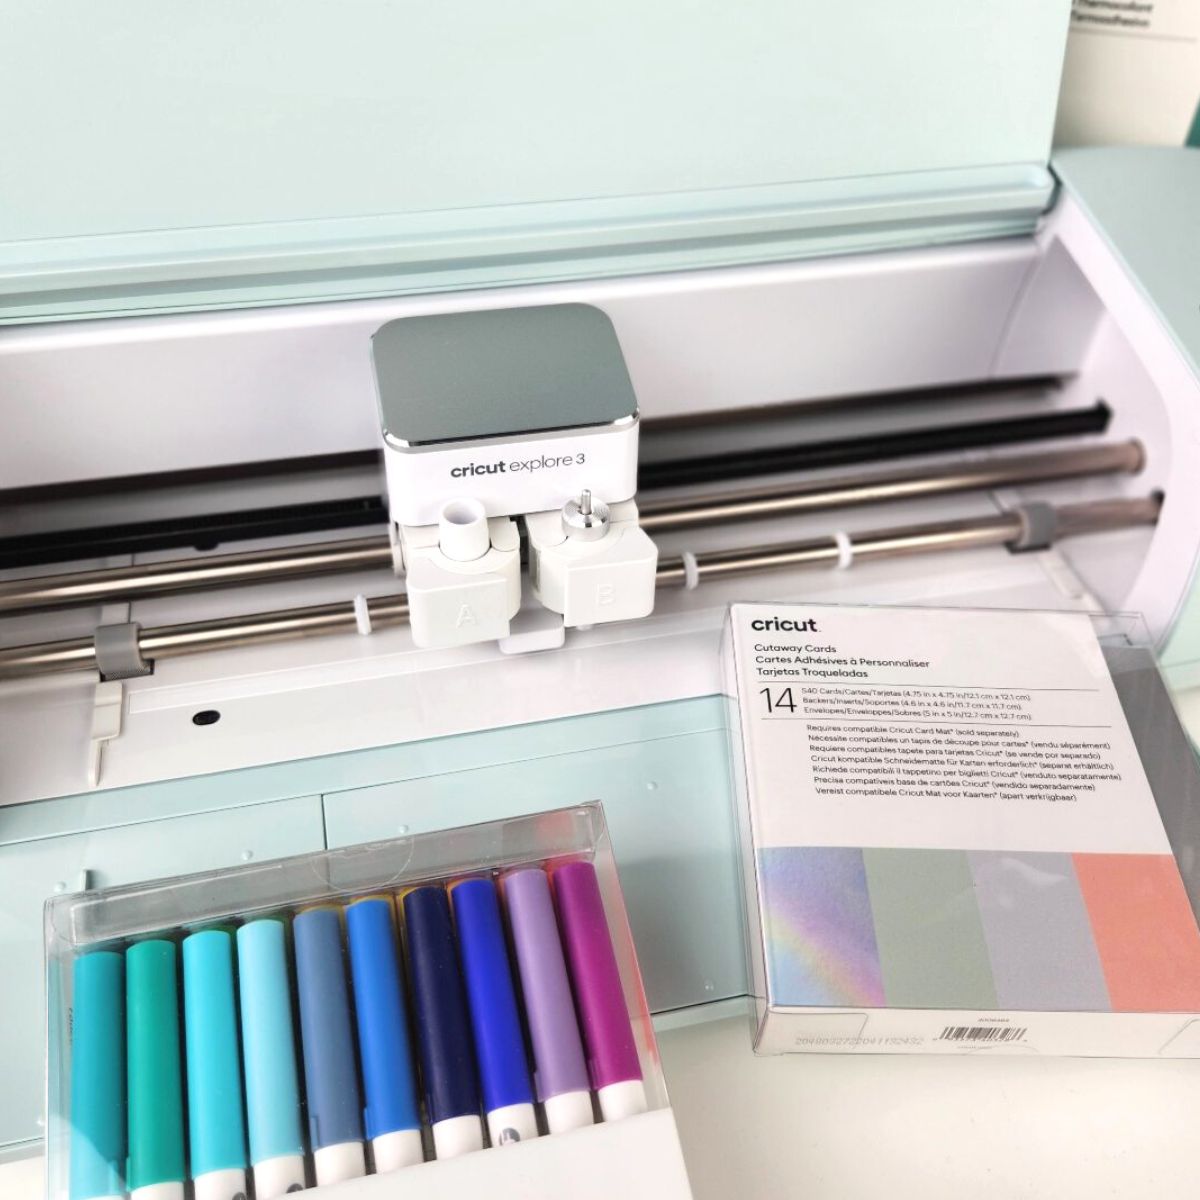 Cricut Explore 3 Review, FAQS, and Who It's For